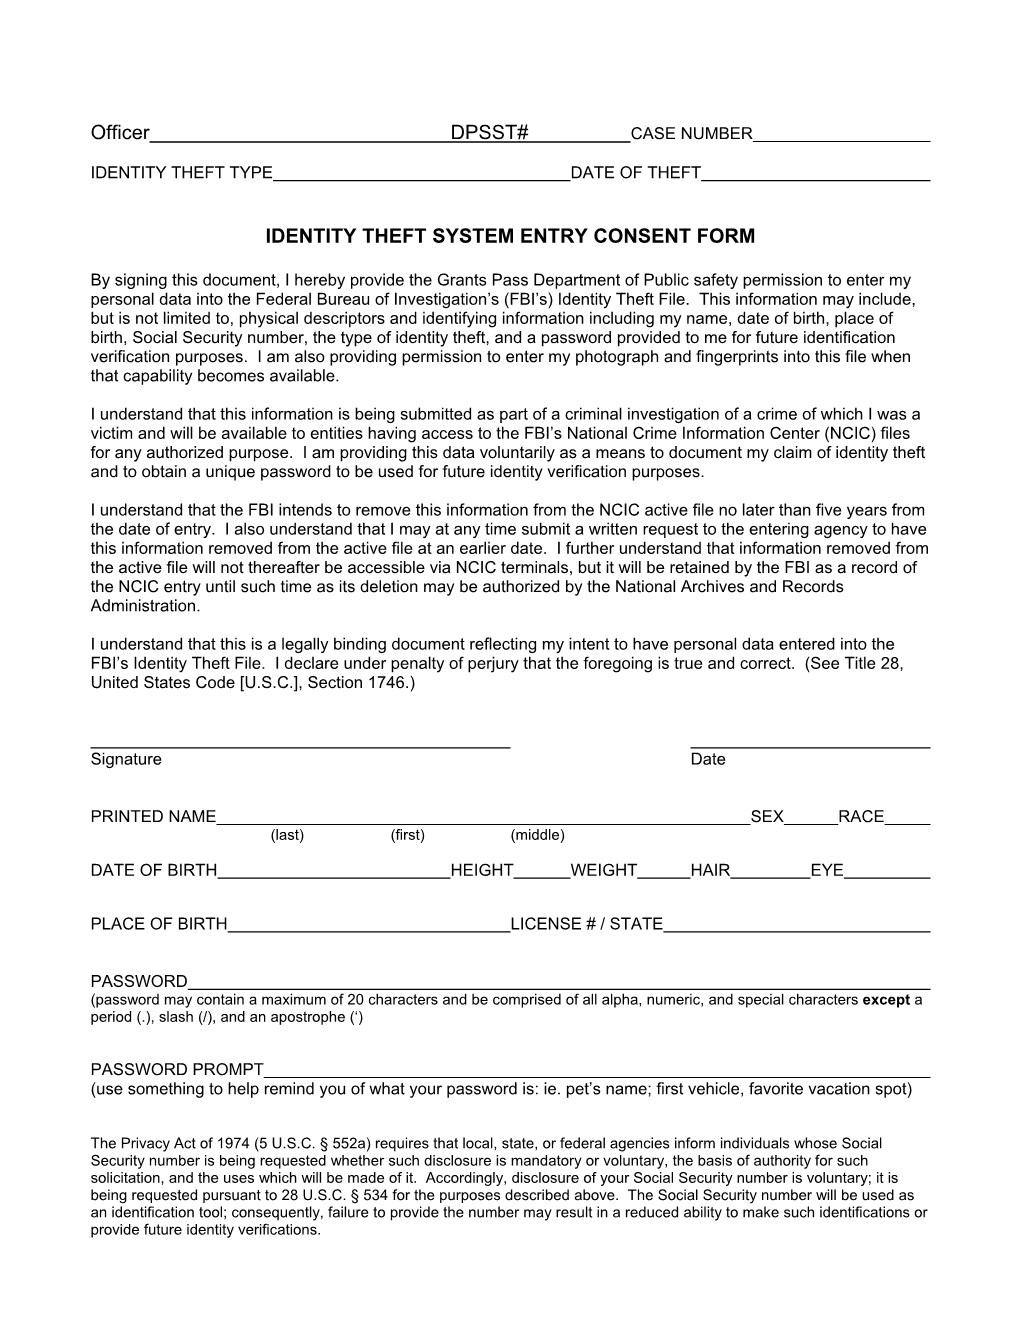 Identity Theft System Entry Consent Form